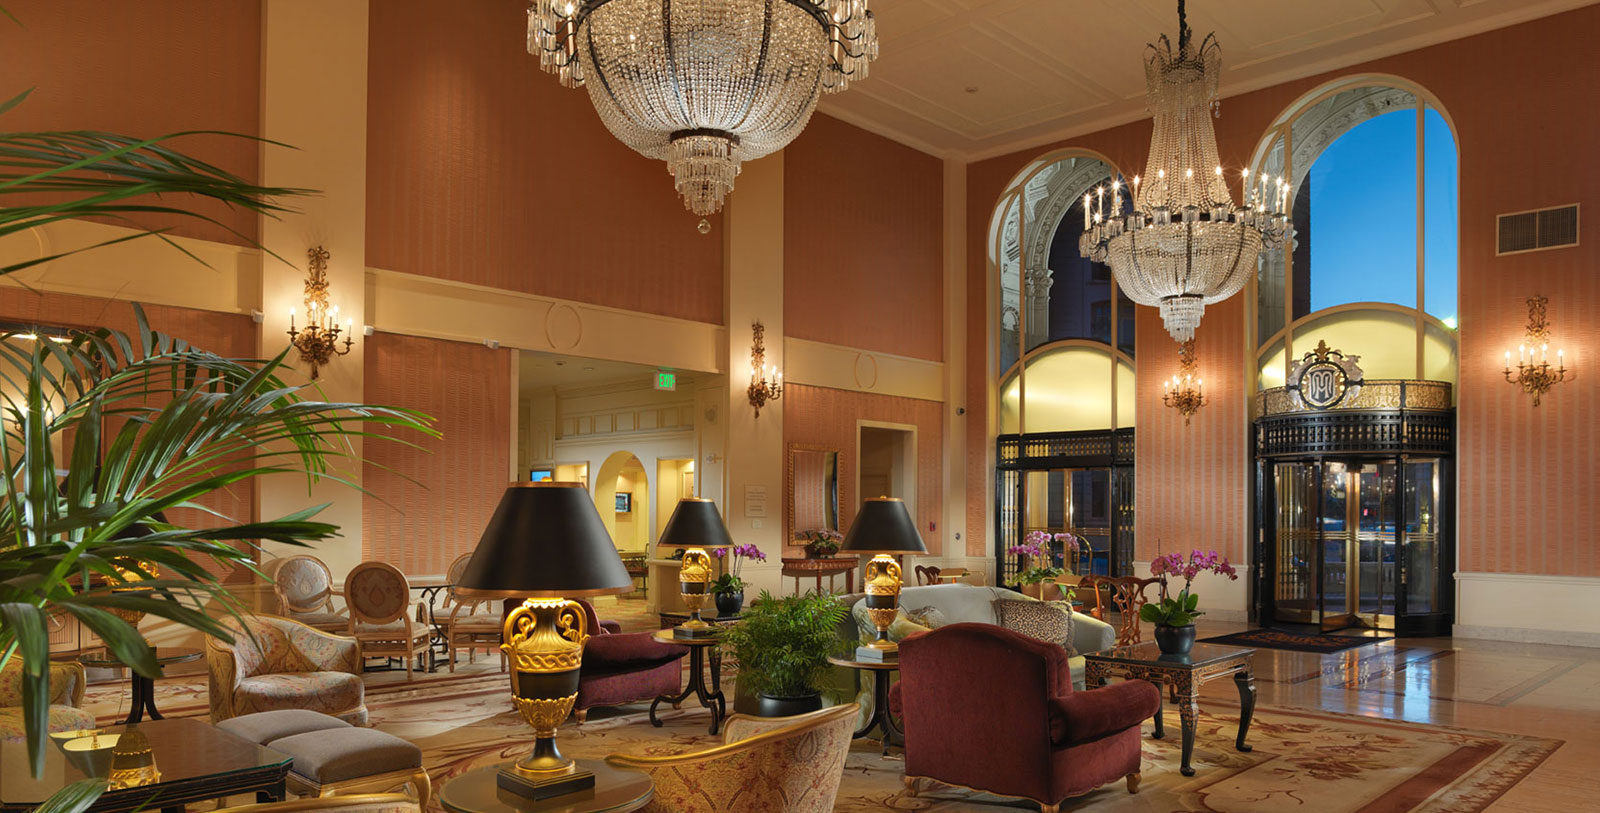 Discover the French château and Spanish Renaissance-style architecture of the InterContinental Mark Hopkins Hotel.